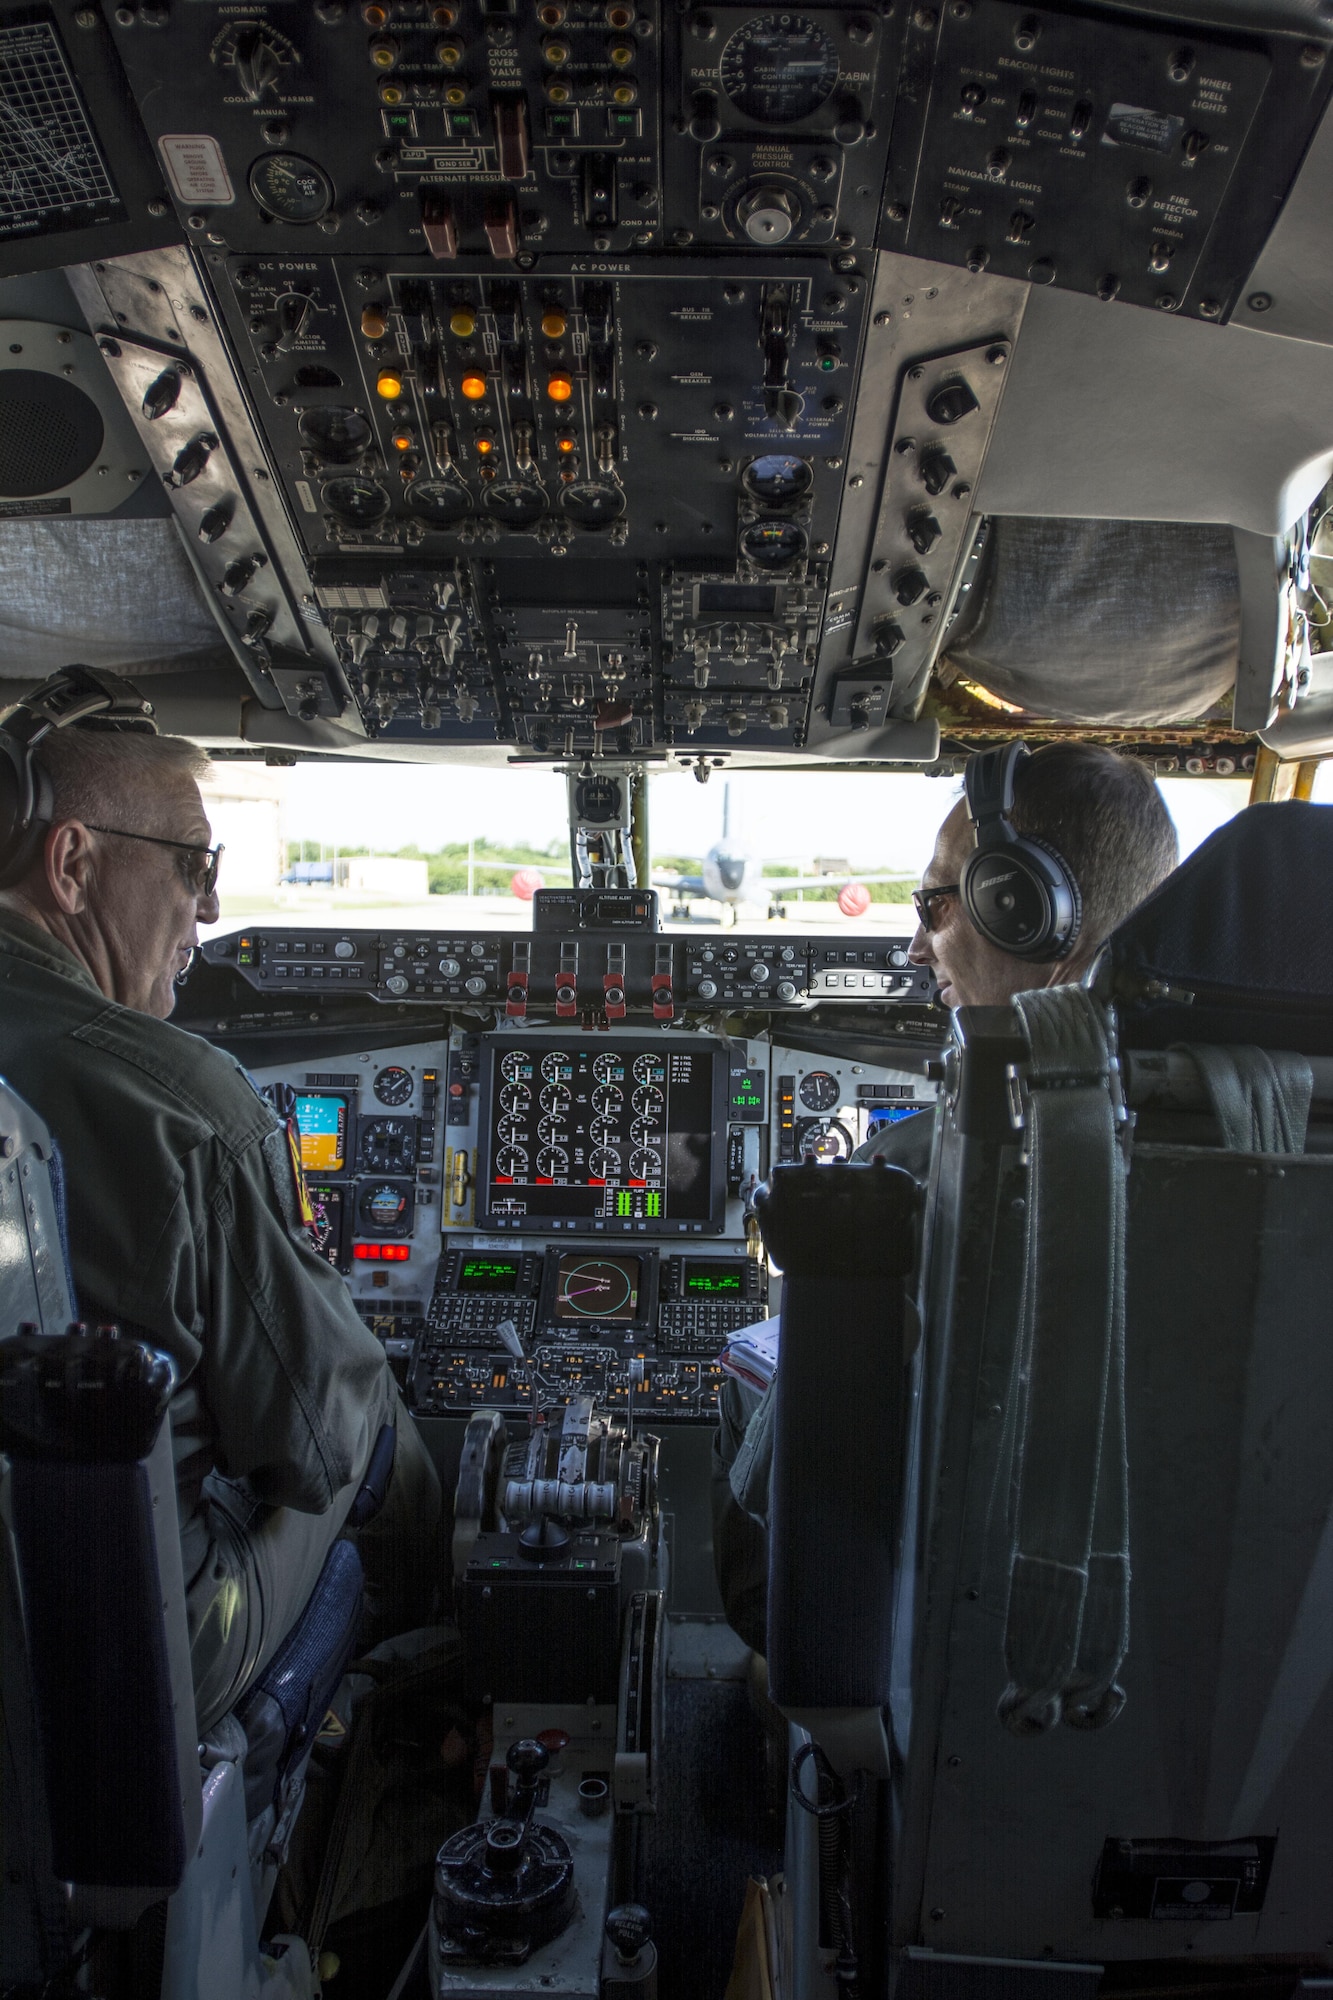 Lt. Col. Eric Wilks and Lt. Col. Marvin Ashbaker, pilots with the 465th Air Refueling Squadron, conduct pre-flight checks aboard the Air Force Reserve Command’s first KC-135 to be upgraded with Block 45 May 5, 2016, at Tinker Air Force Base, Okla. The $910 million dollar modification program has upgraded 29 aircraft to date. (U.S. Air Force photo/Tech. Sgt. Lauren Gleason)